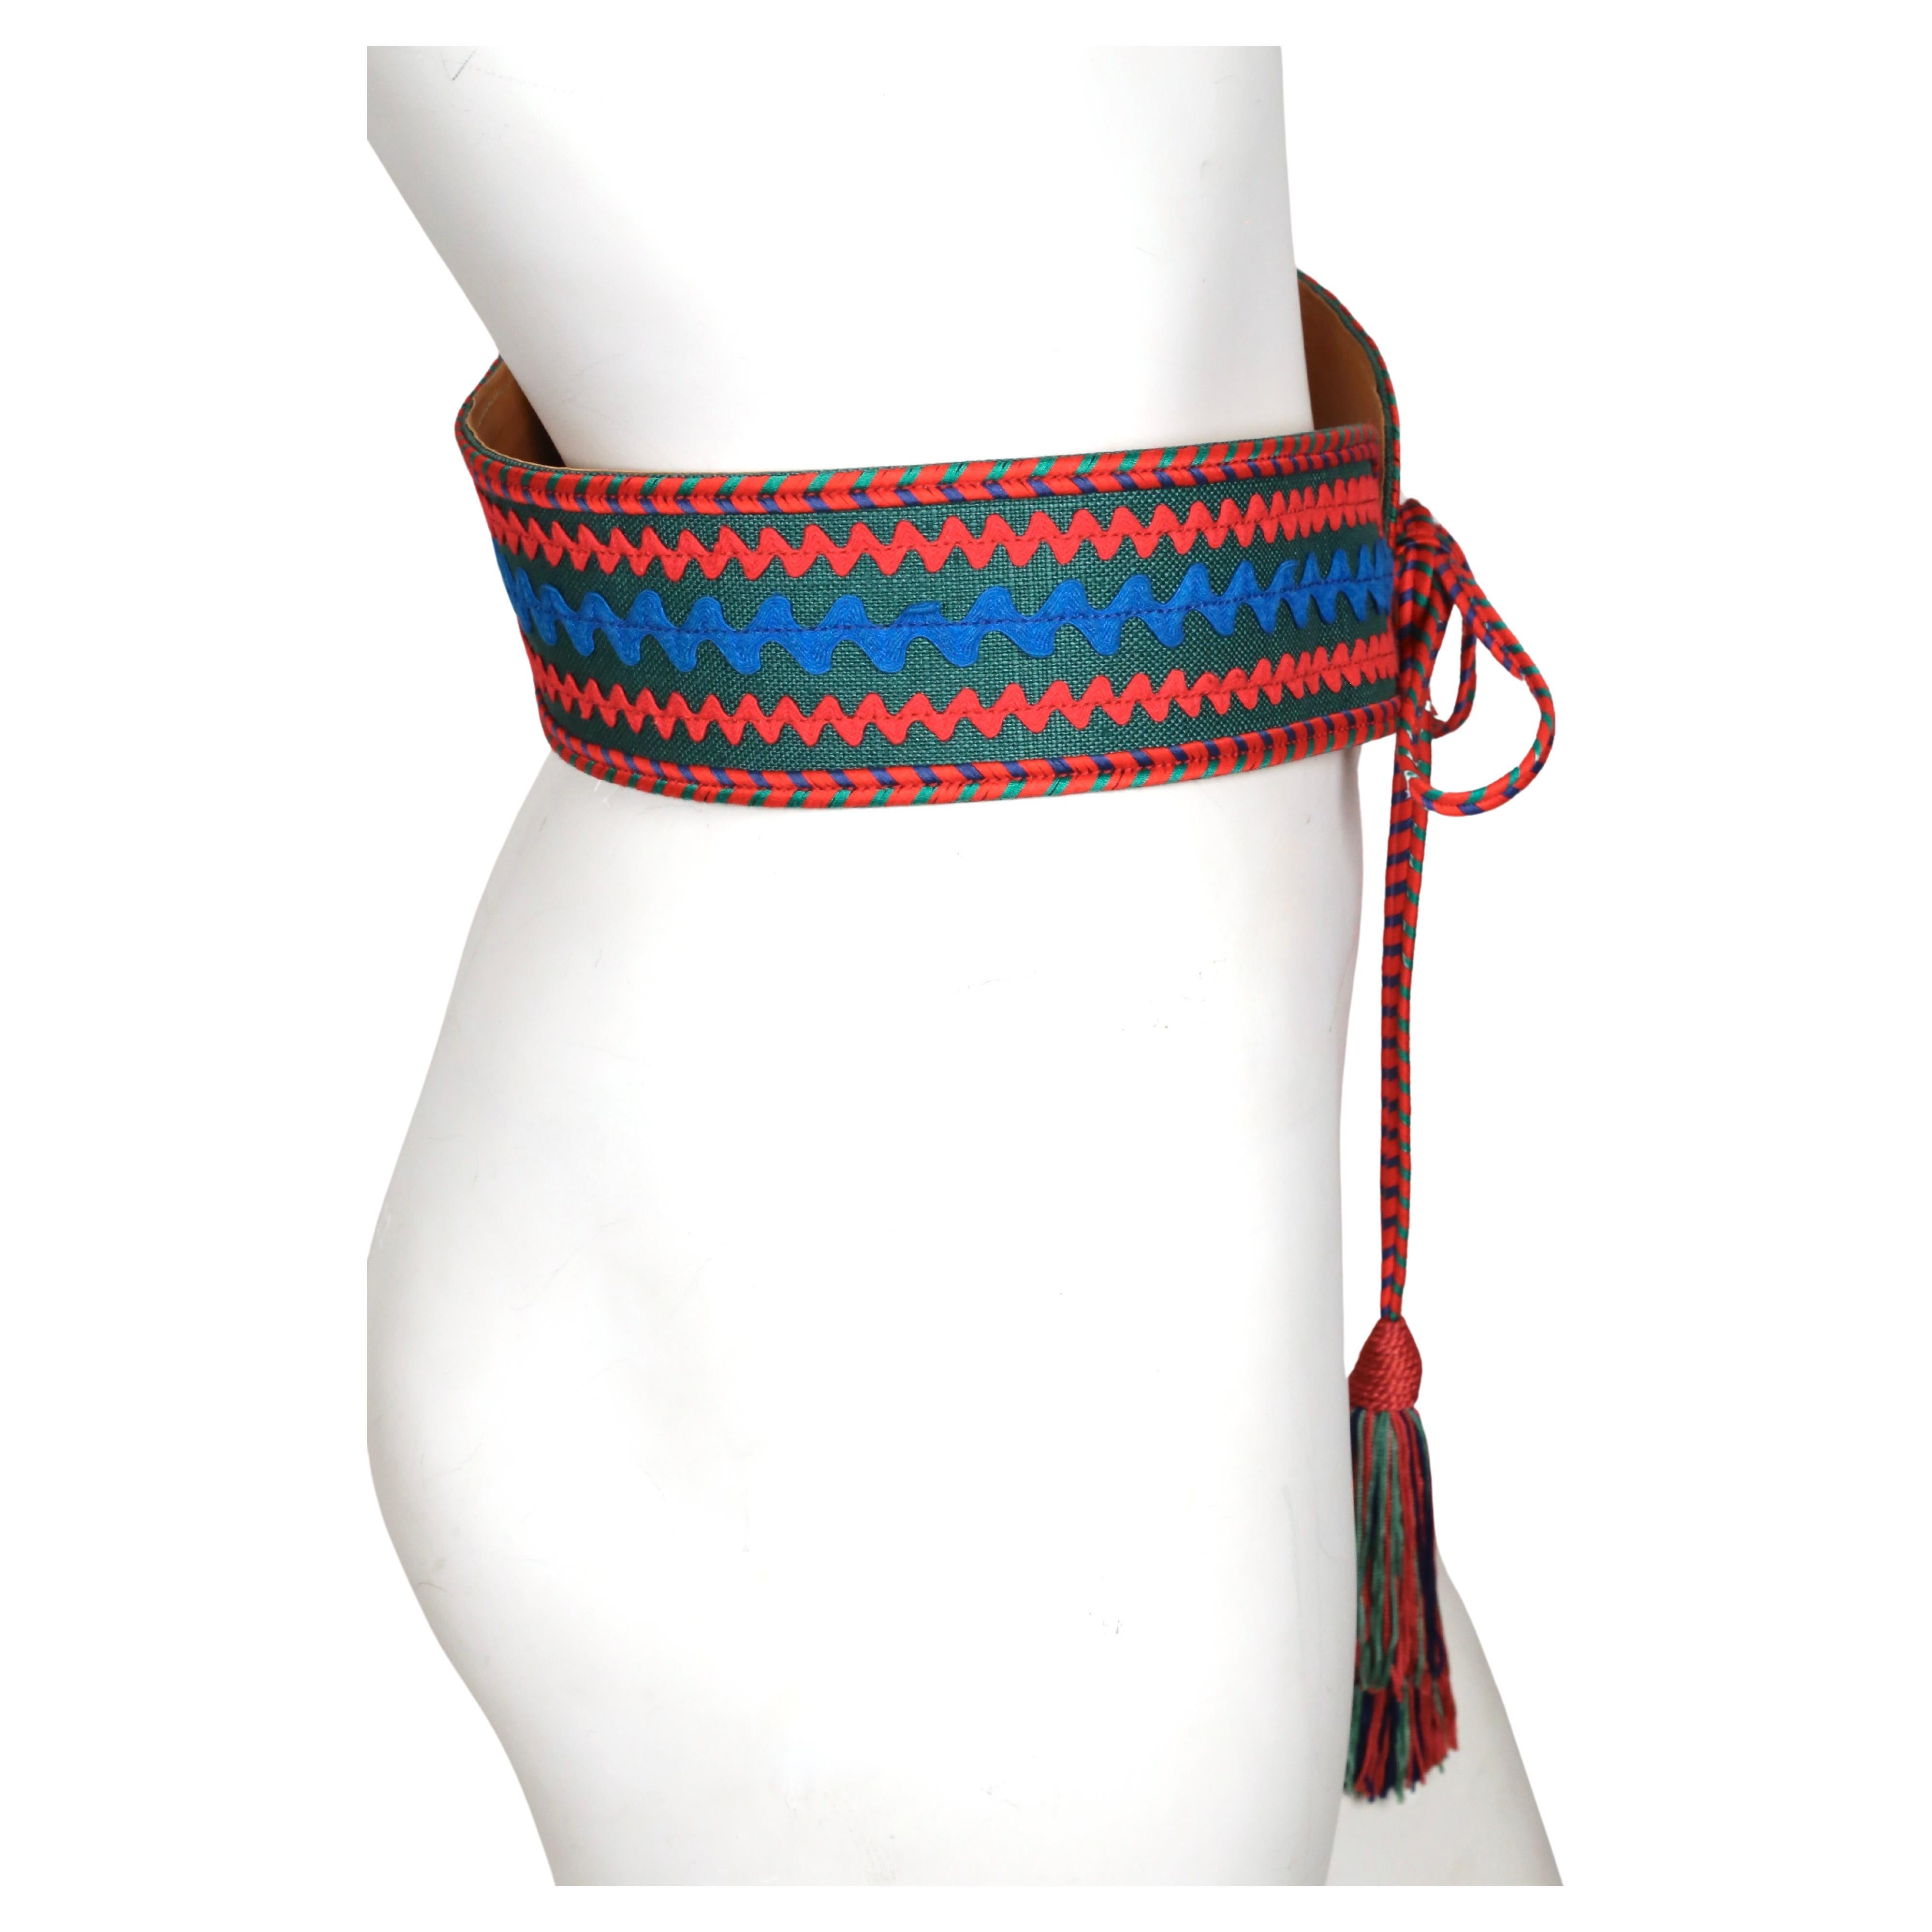 1970's YVES SAINT LAURENT belt with ric-rac accents, long ties and tassels For Sale 1